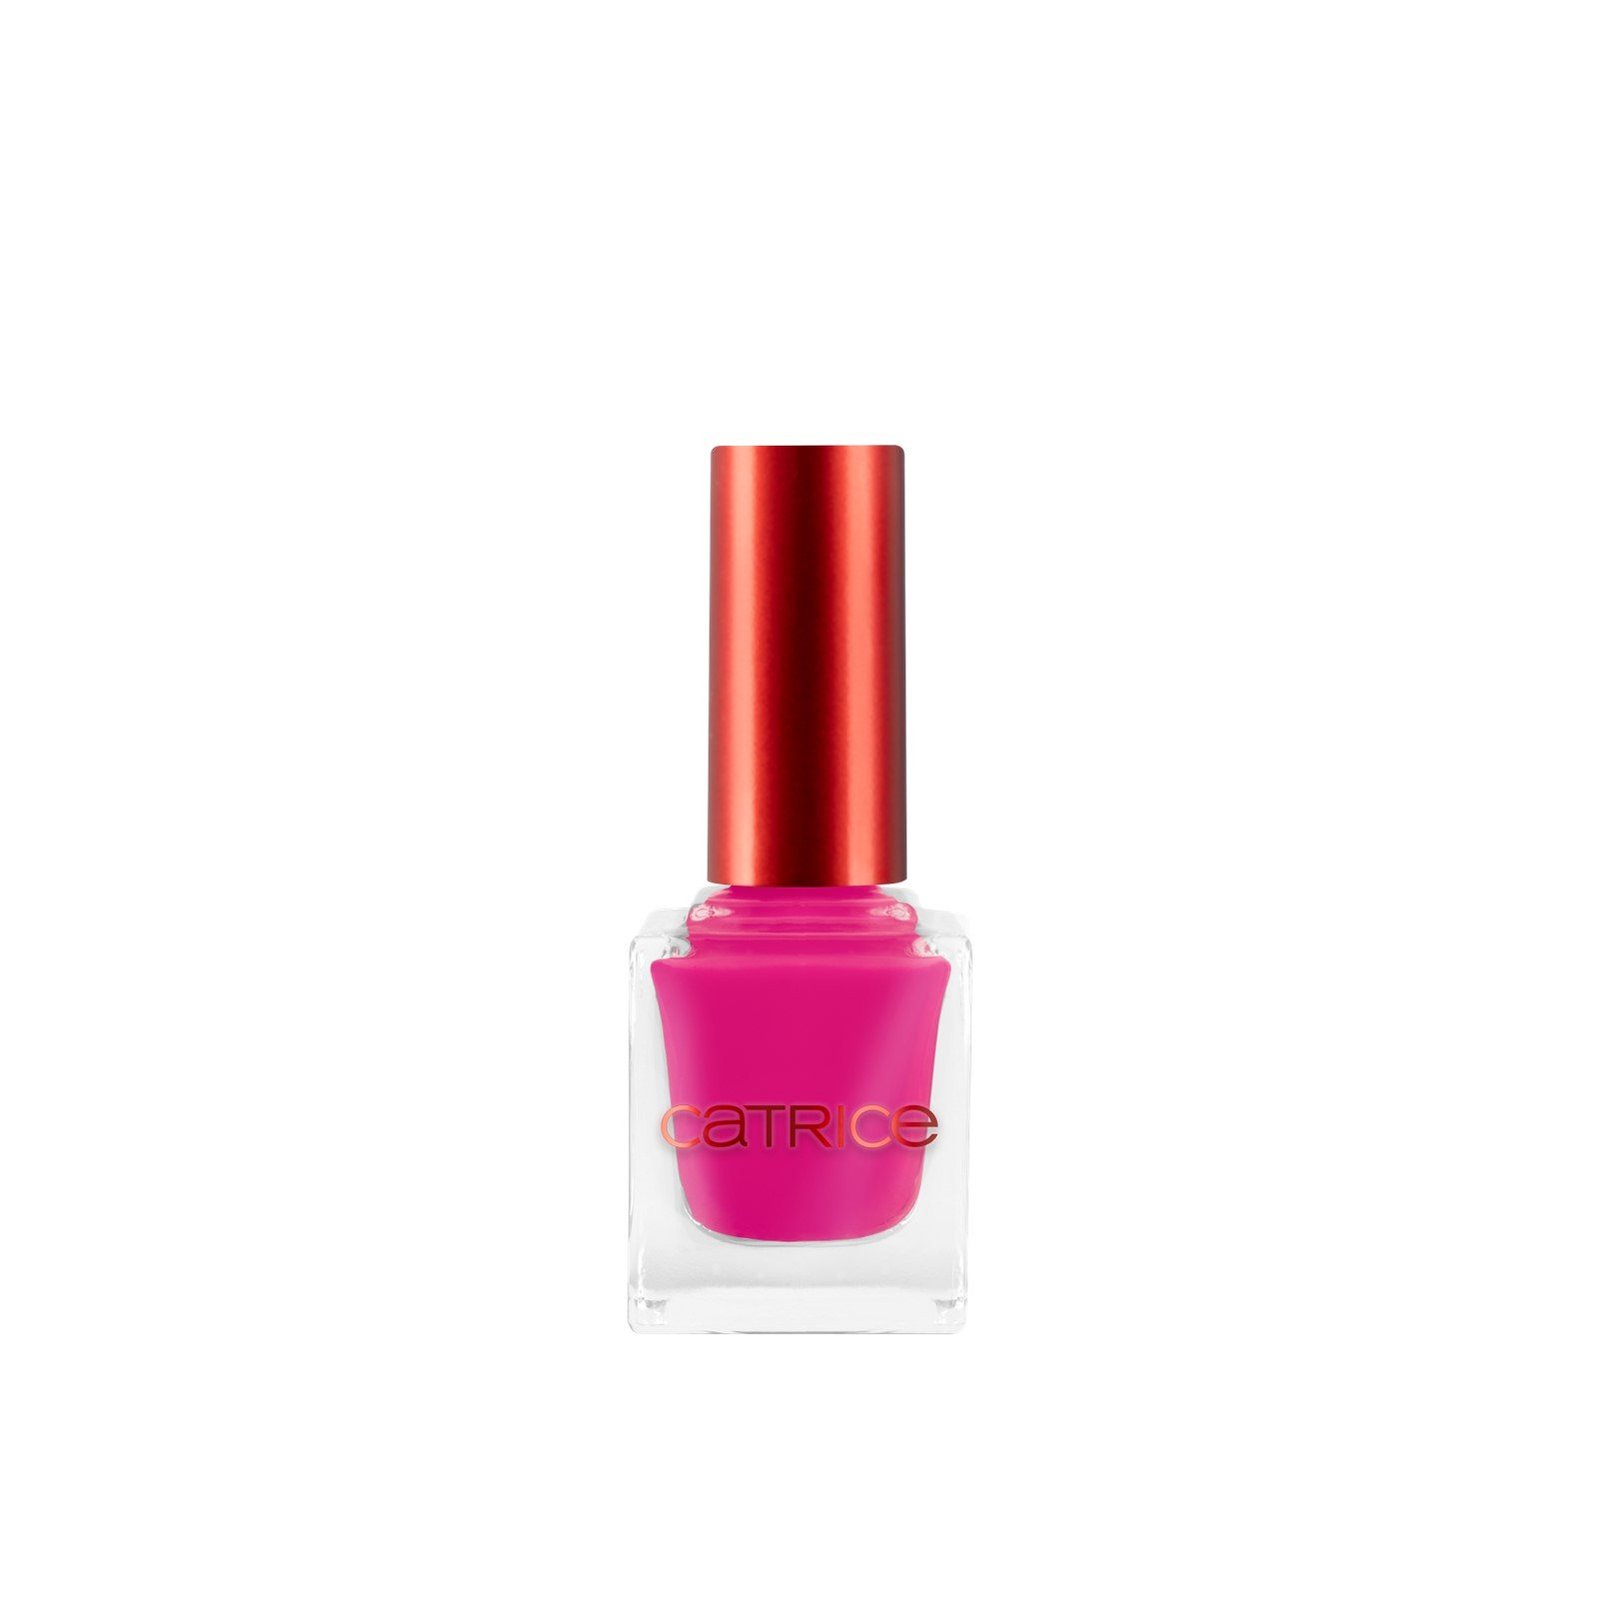 Catrice Heart Affair Nail Lacquer 01 No One's Lover 10.5ml